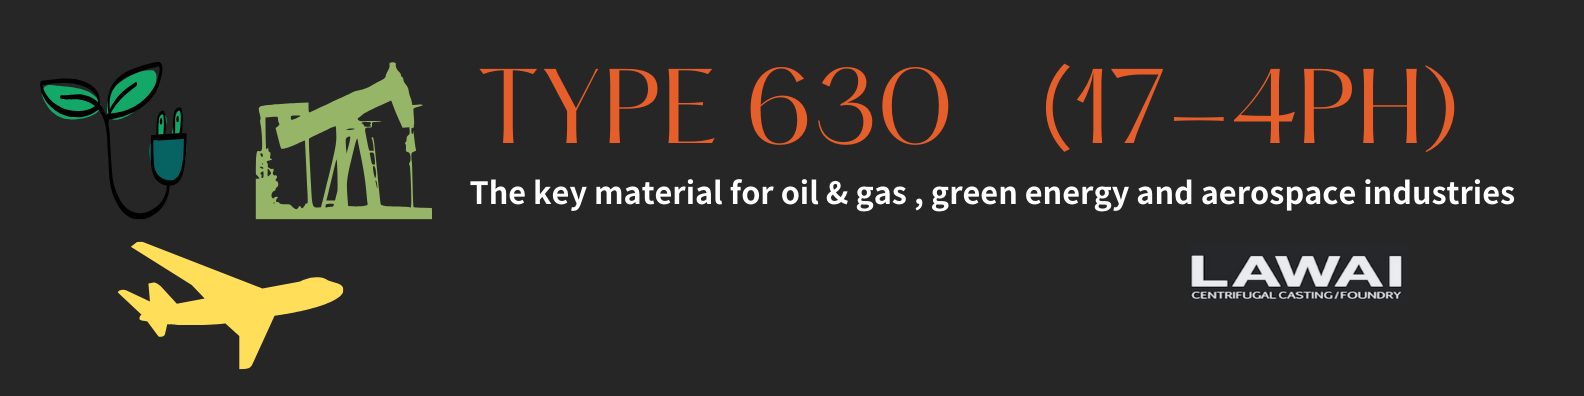 Type 630 tube, 1.4542 tube, type 630 ring, 1.4542 ring applied in green energy, oil & gas and green energy industries